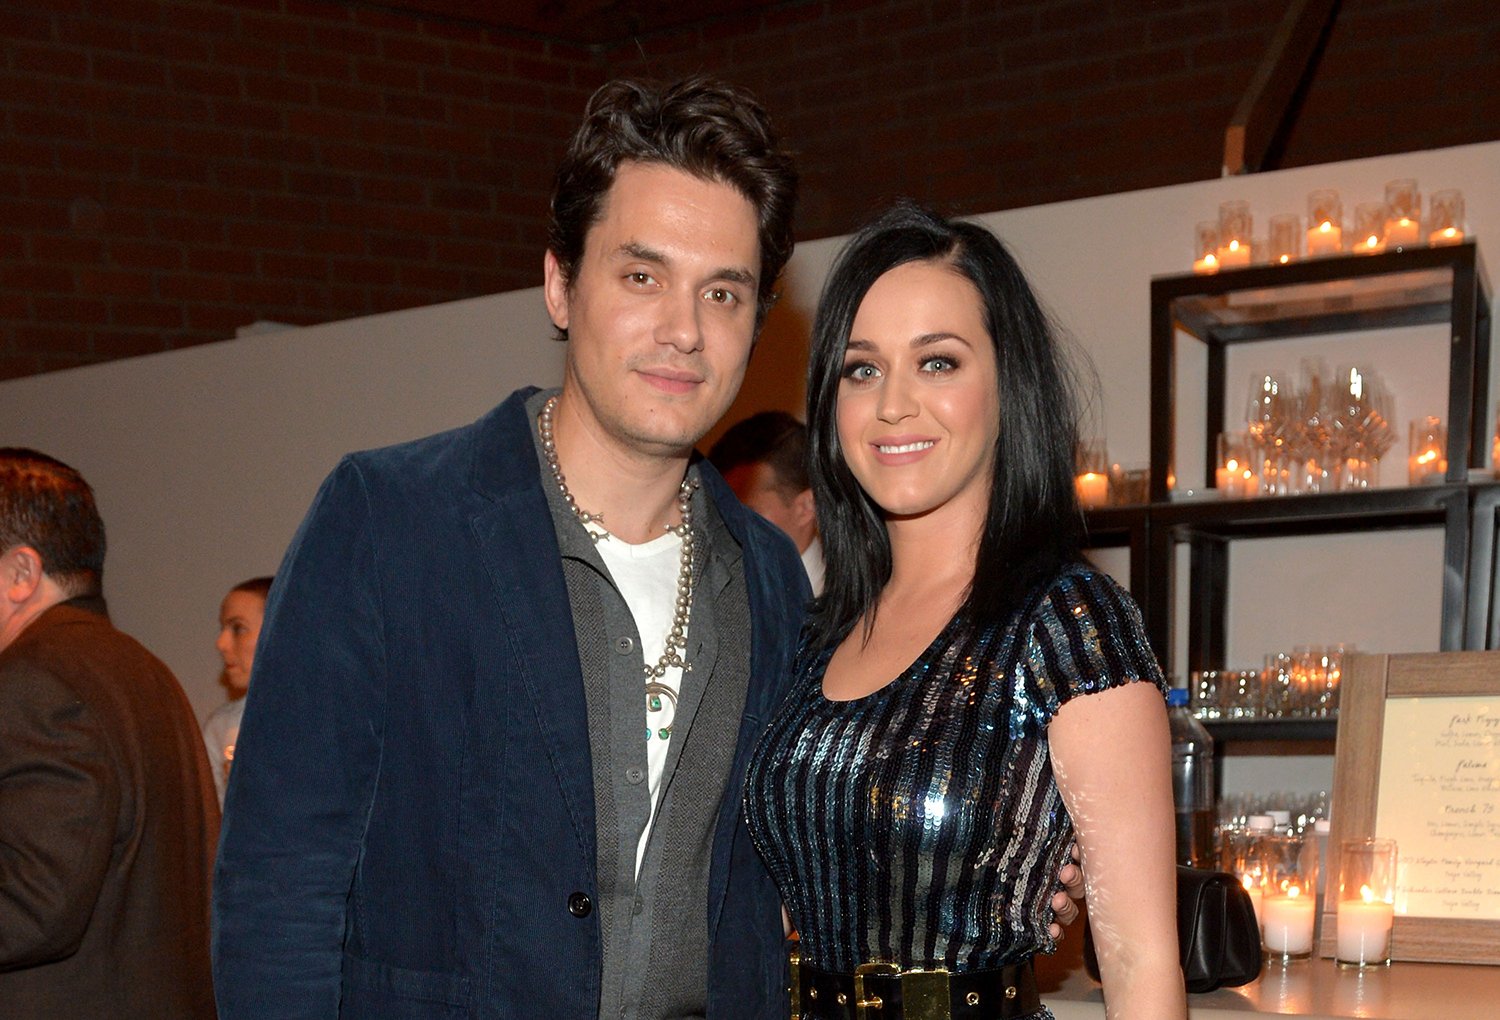 John Mayer and Katy Perry attend Hollywood Stands Up To Cancer Event in 2014